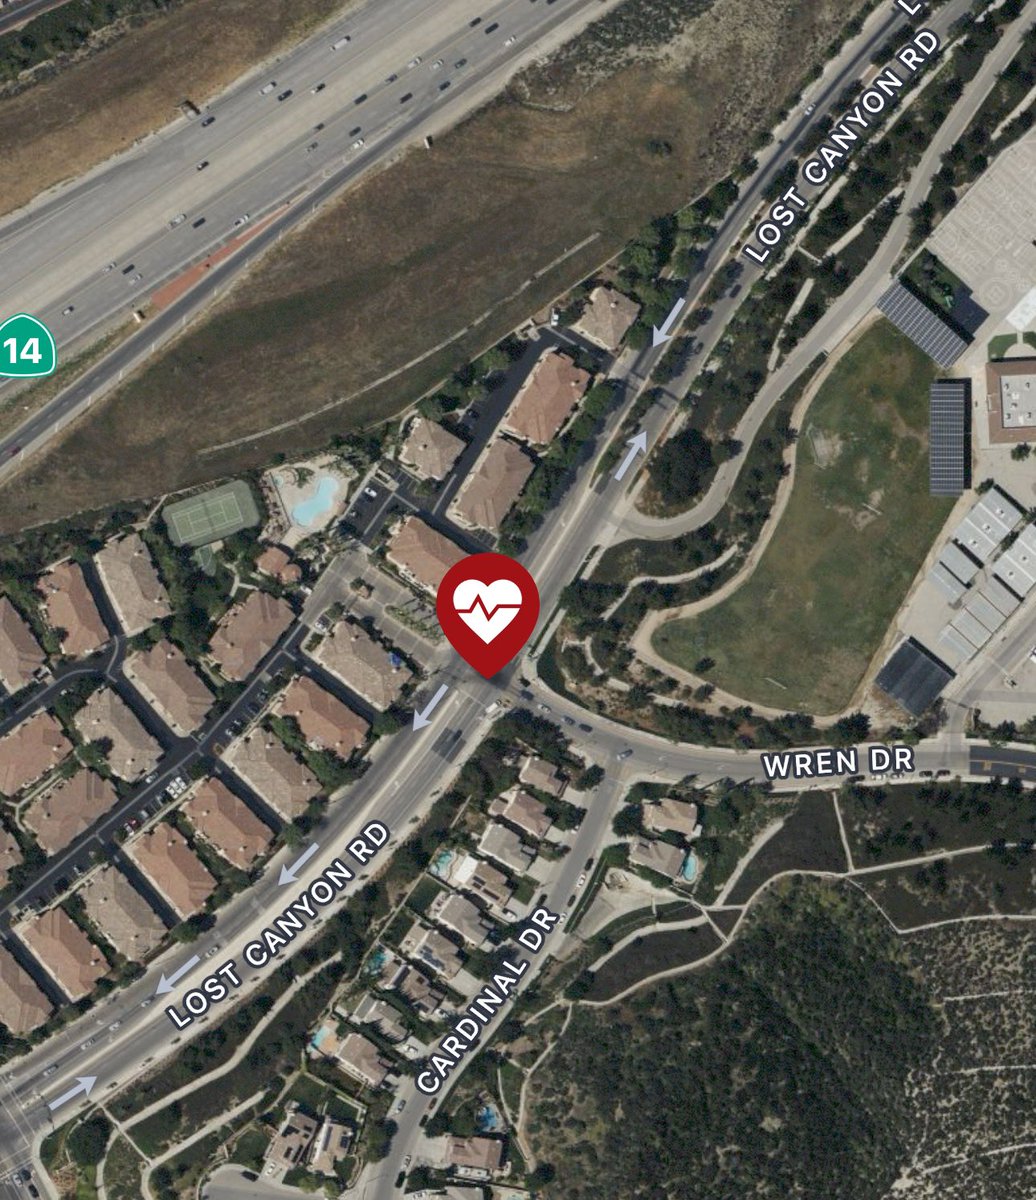 Fire Department is on scene attending to a possible victim of an attempted kidnapping. Female victim was punched in the face. The suspect was last seen on Lost Cyn Rd.